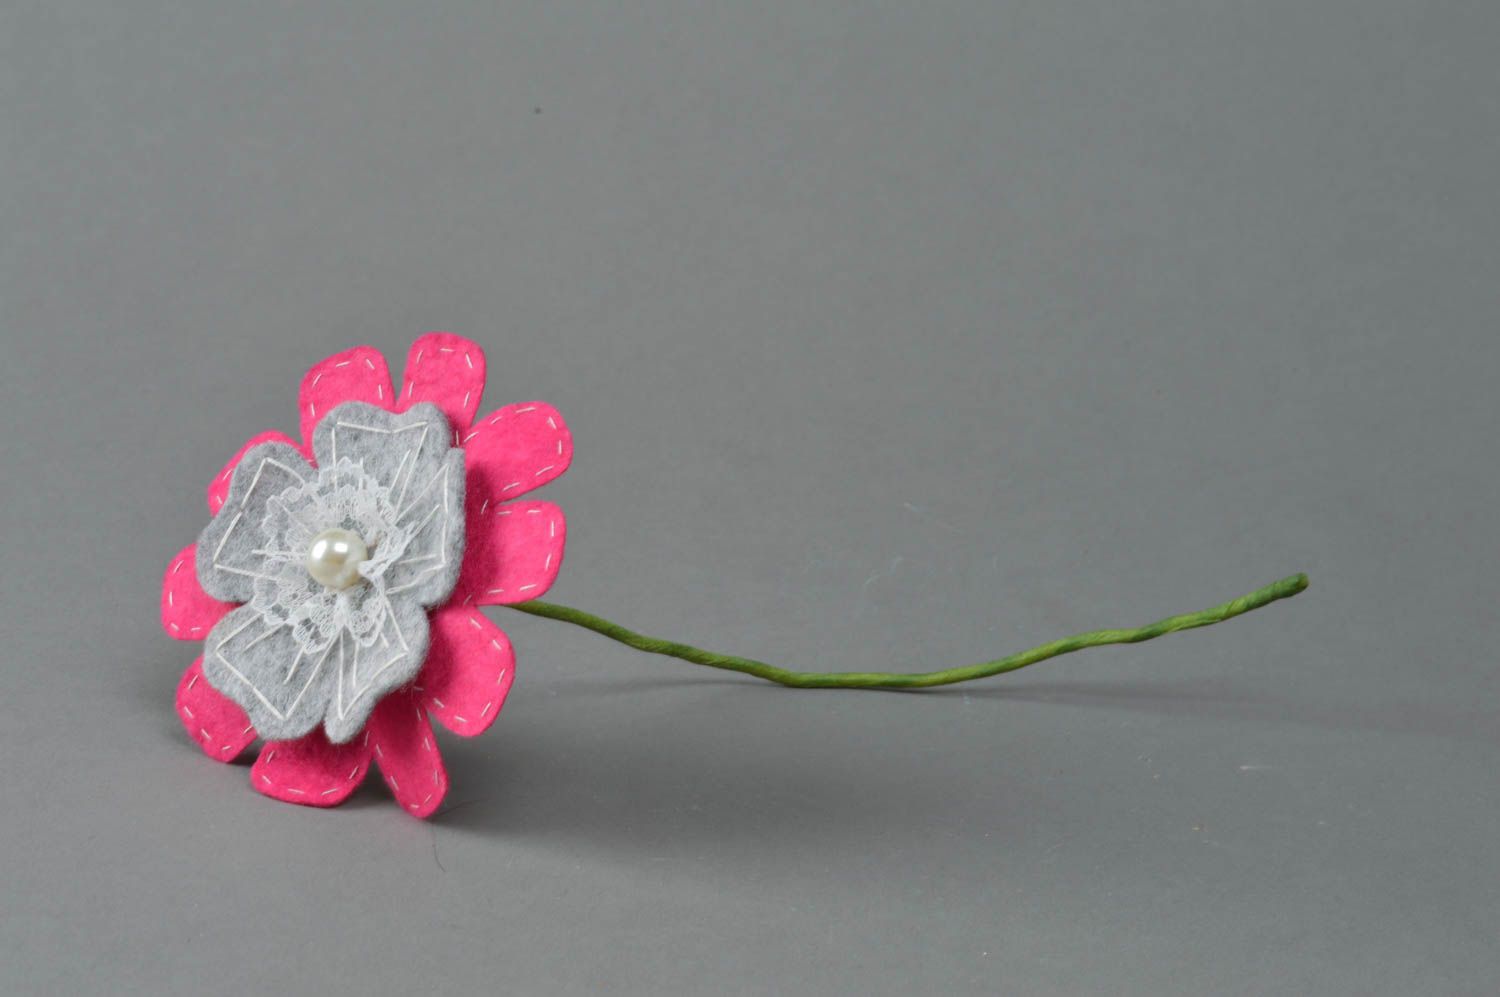 Decorative flower toy made of felt present for child hand-crafted home decor photo 1